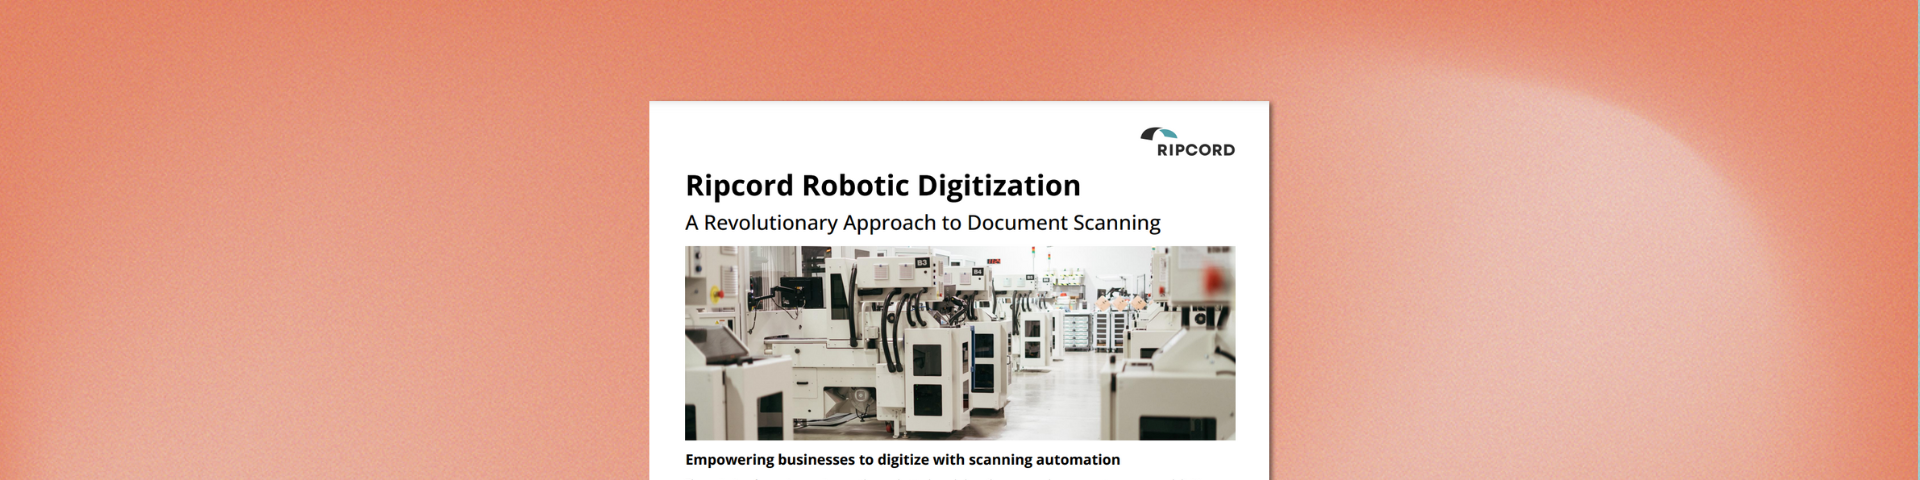 Banner - Ripcord Robotic Digitization Overview